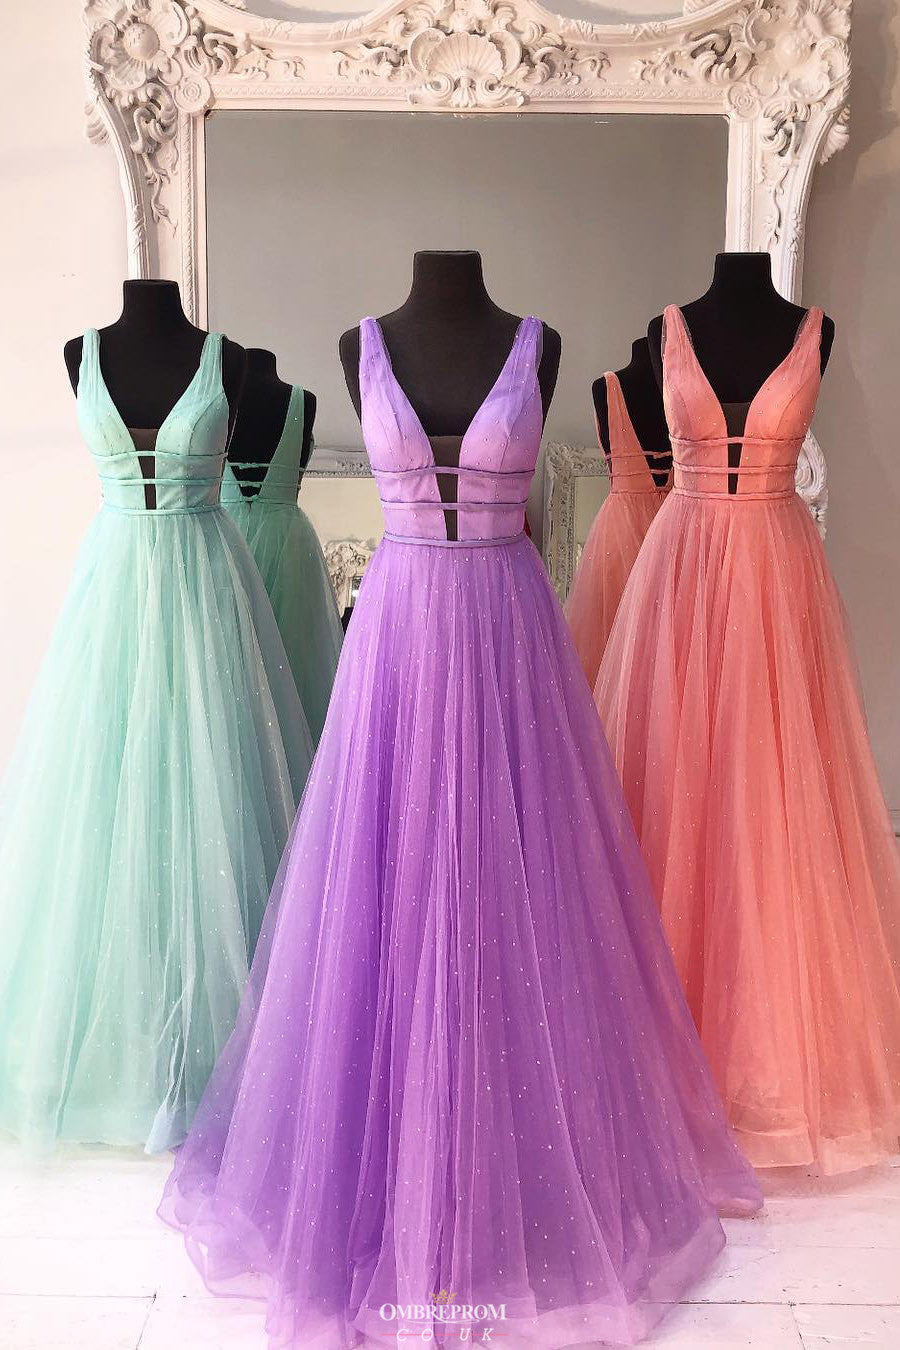 New Deep V-Neck Solid Tulle A-line Long Prom Dress With Beading OP547